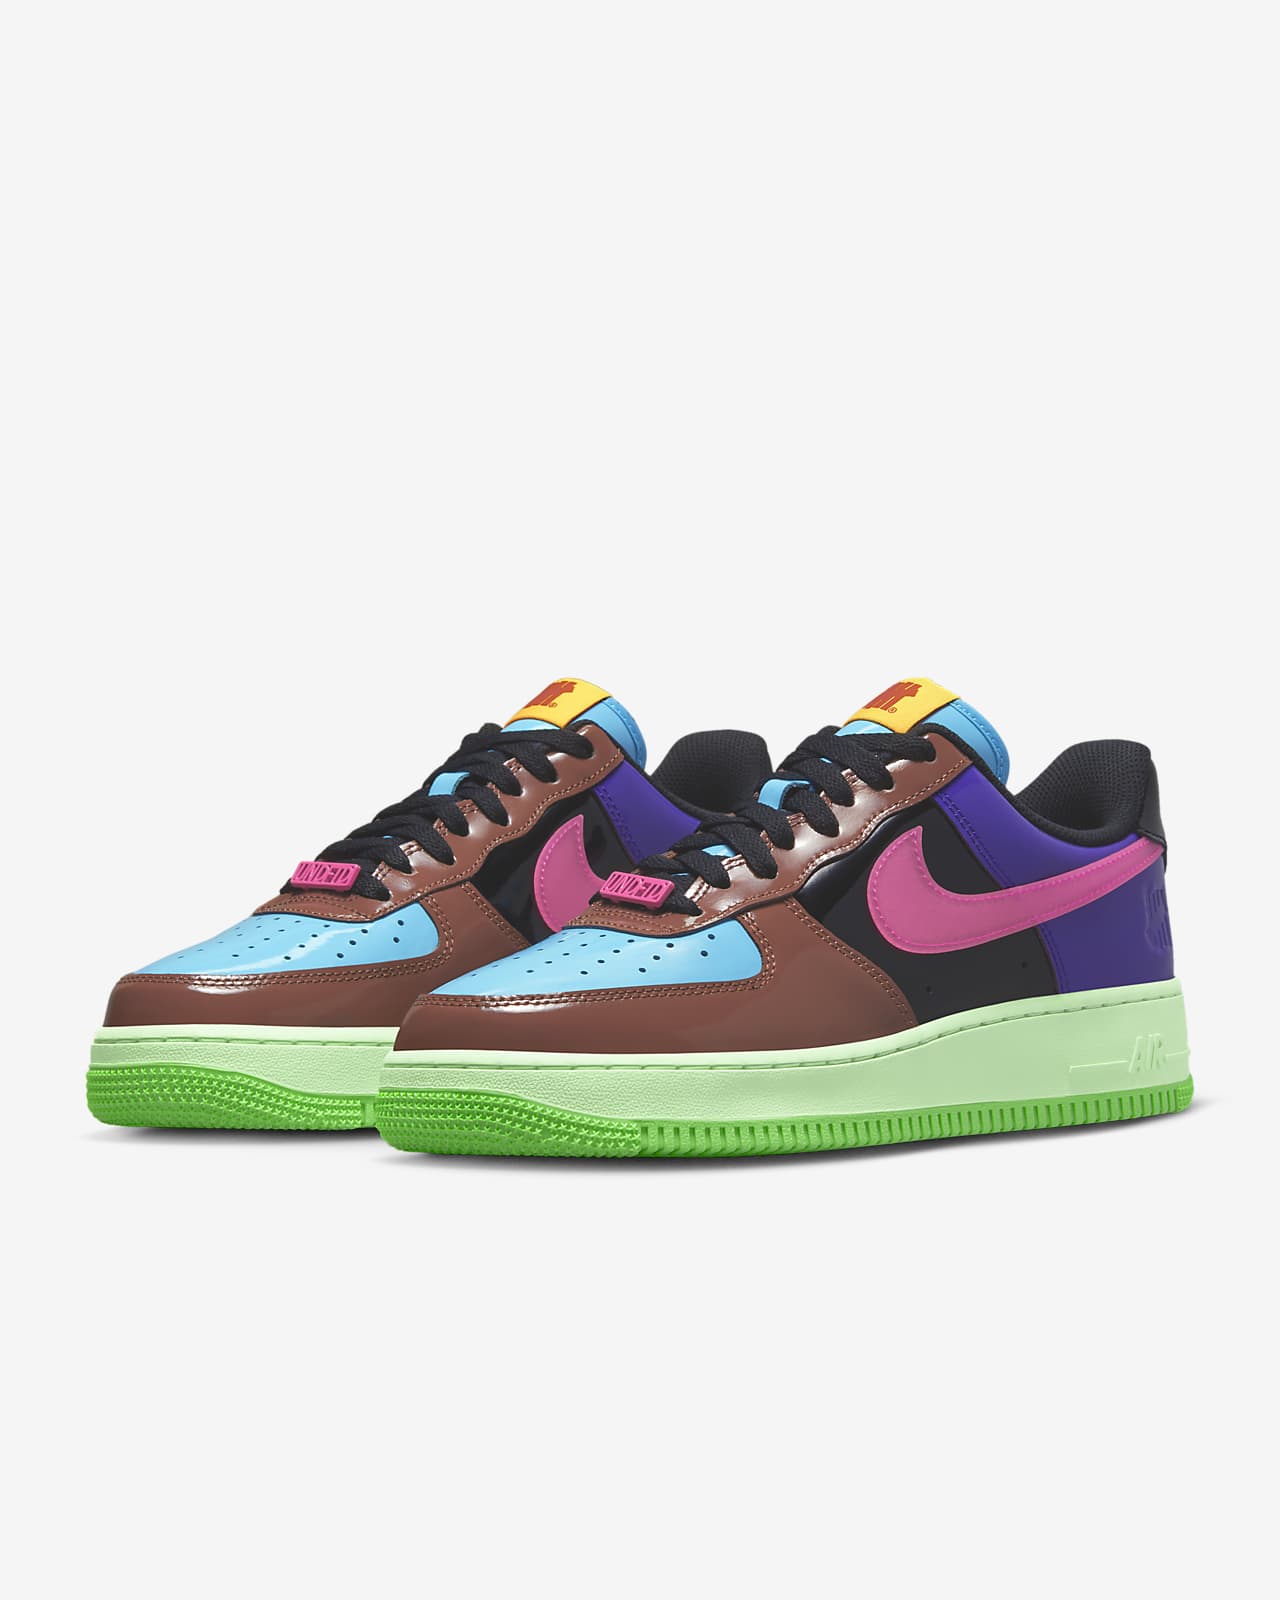 Nike undefeated lunar force 1